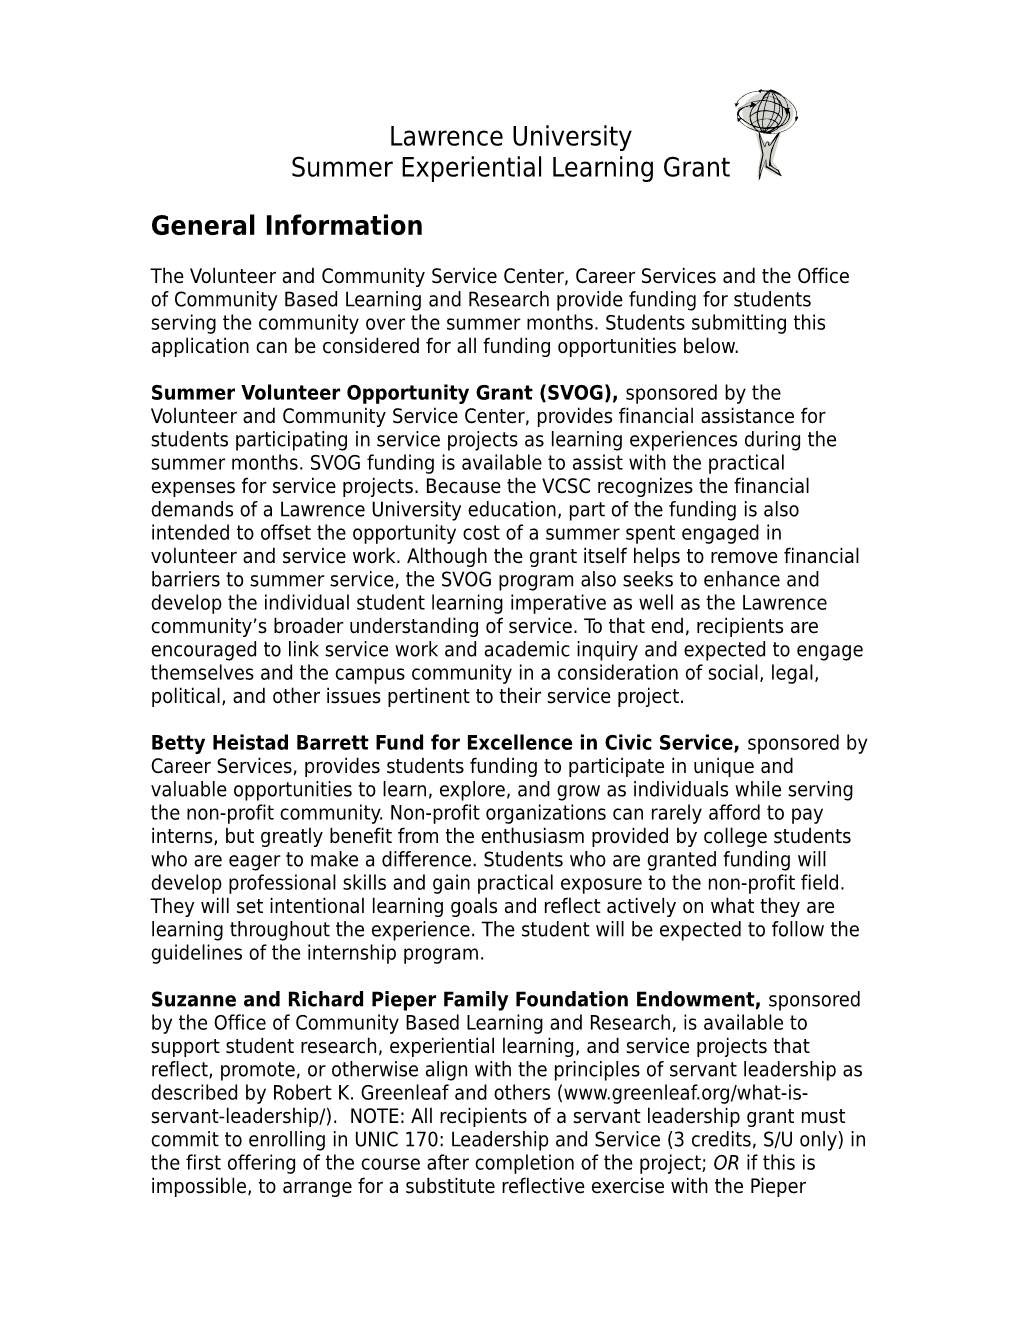 Summer Experiential Learning Grant